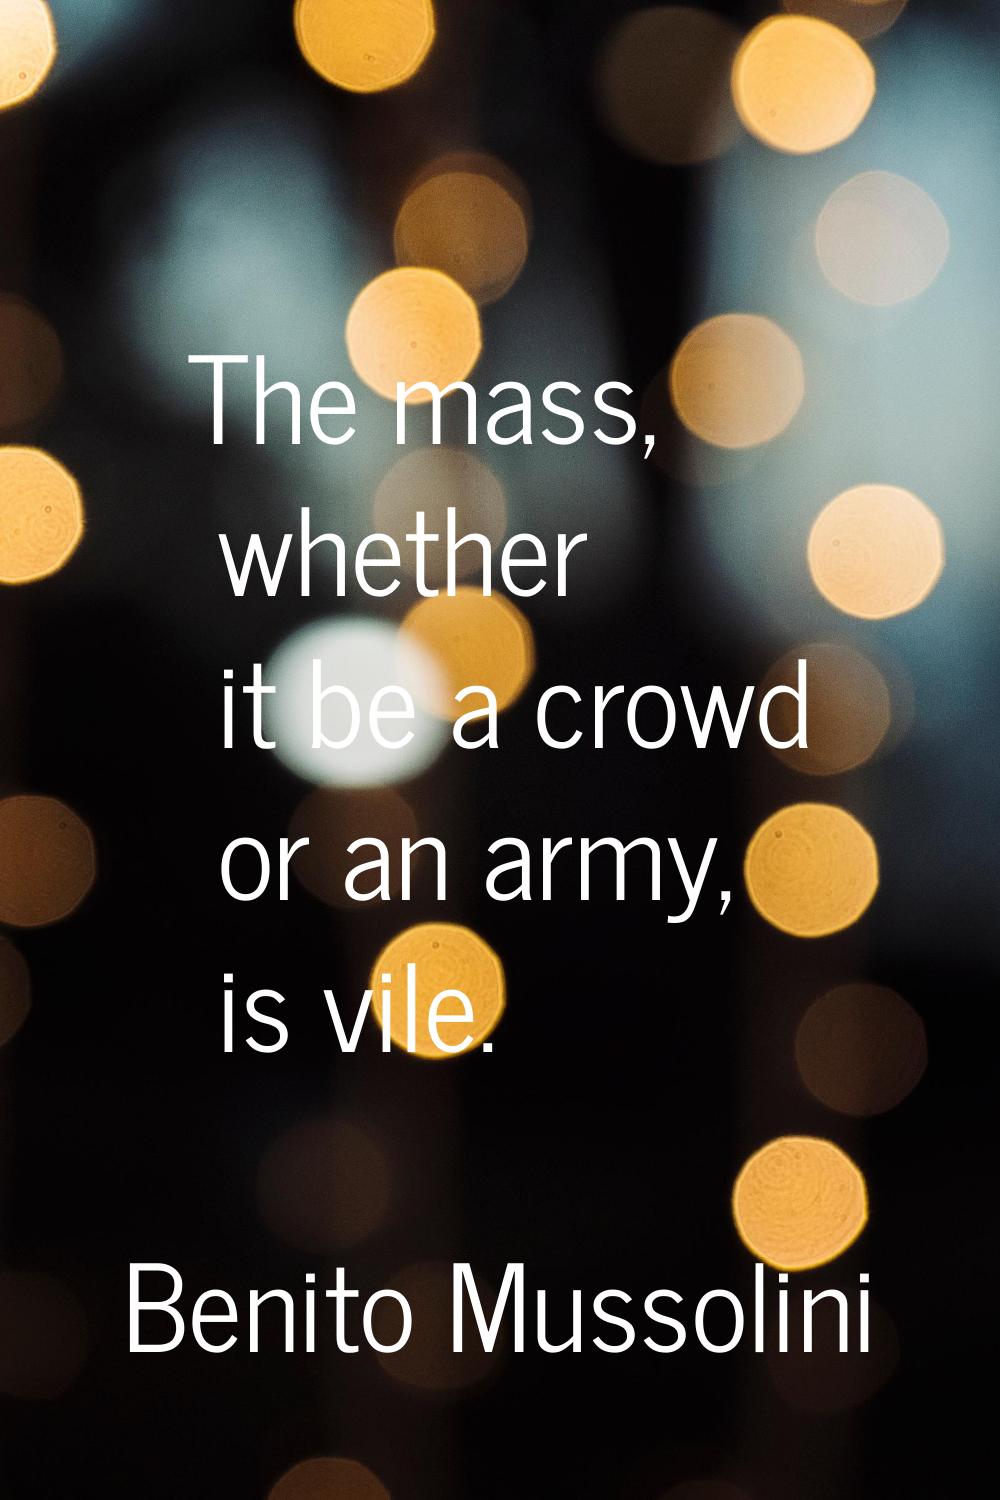 The mass, whether it be a crowd or an army, is vile.